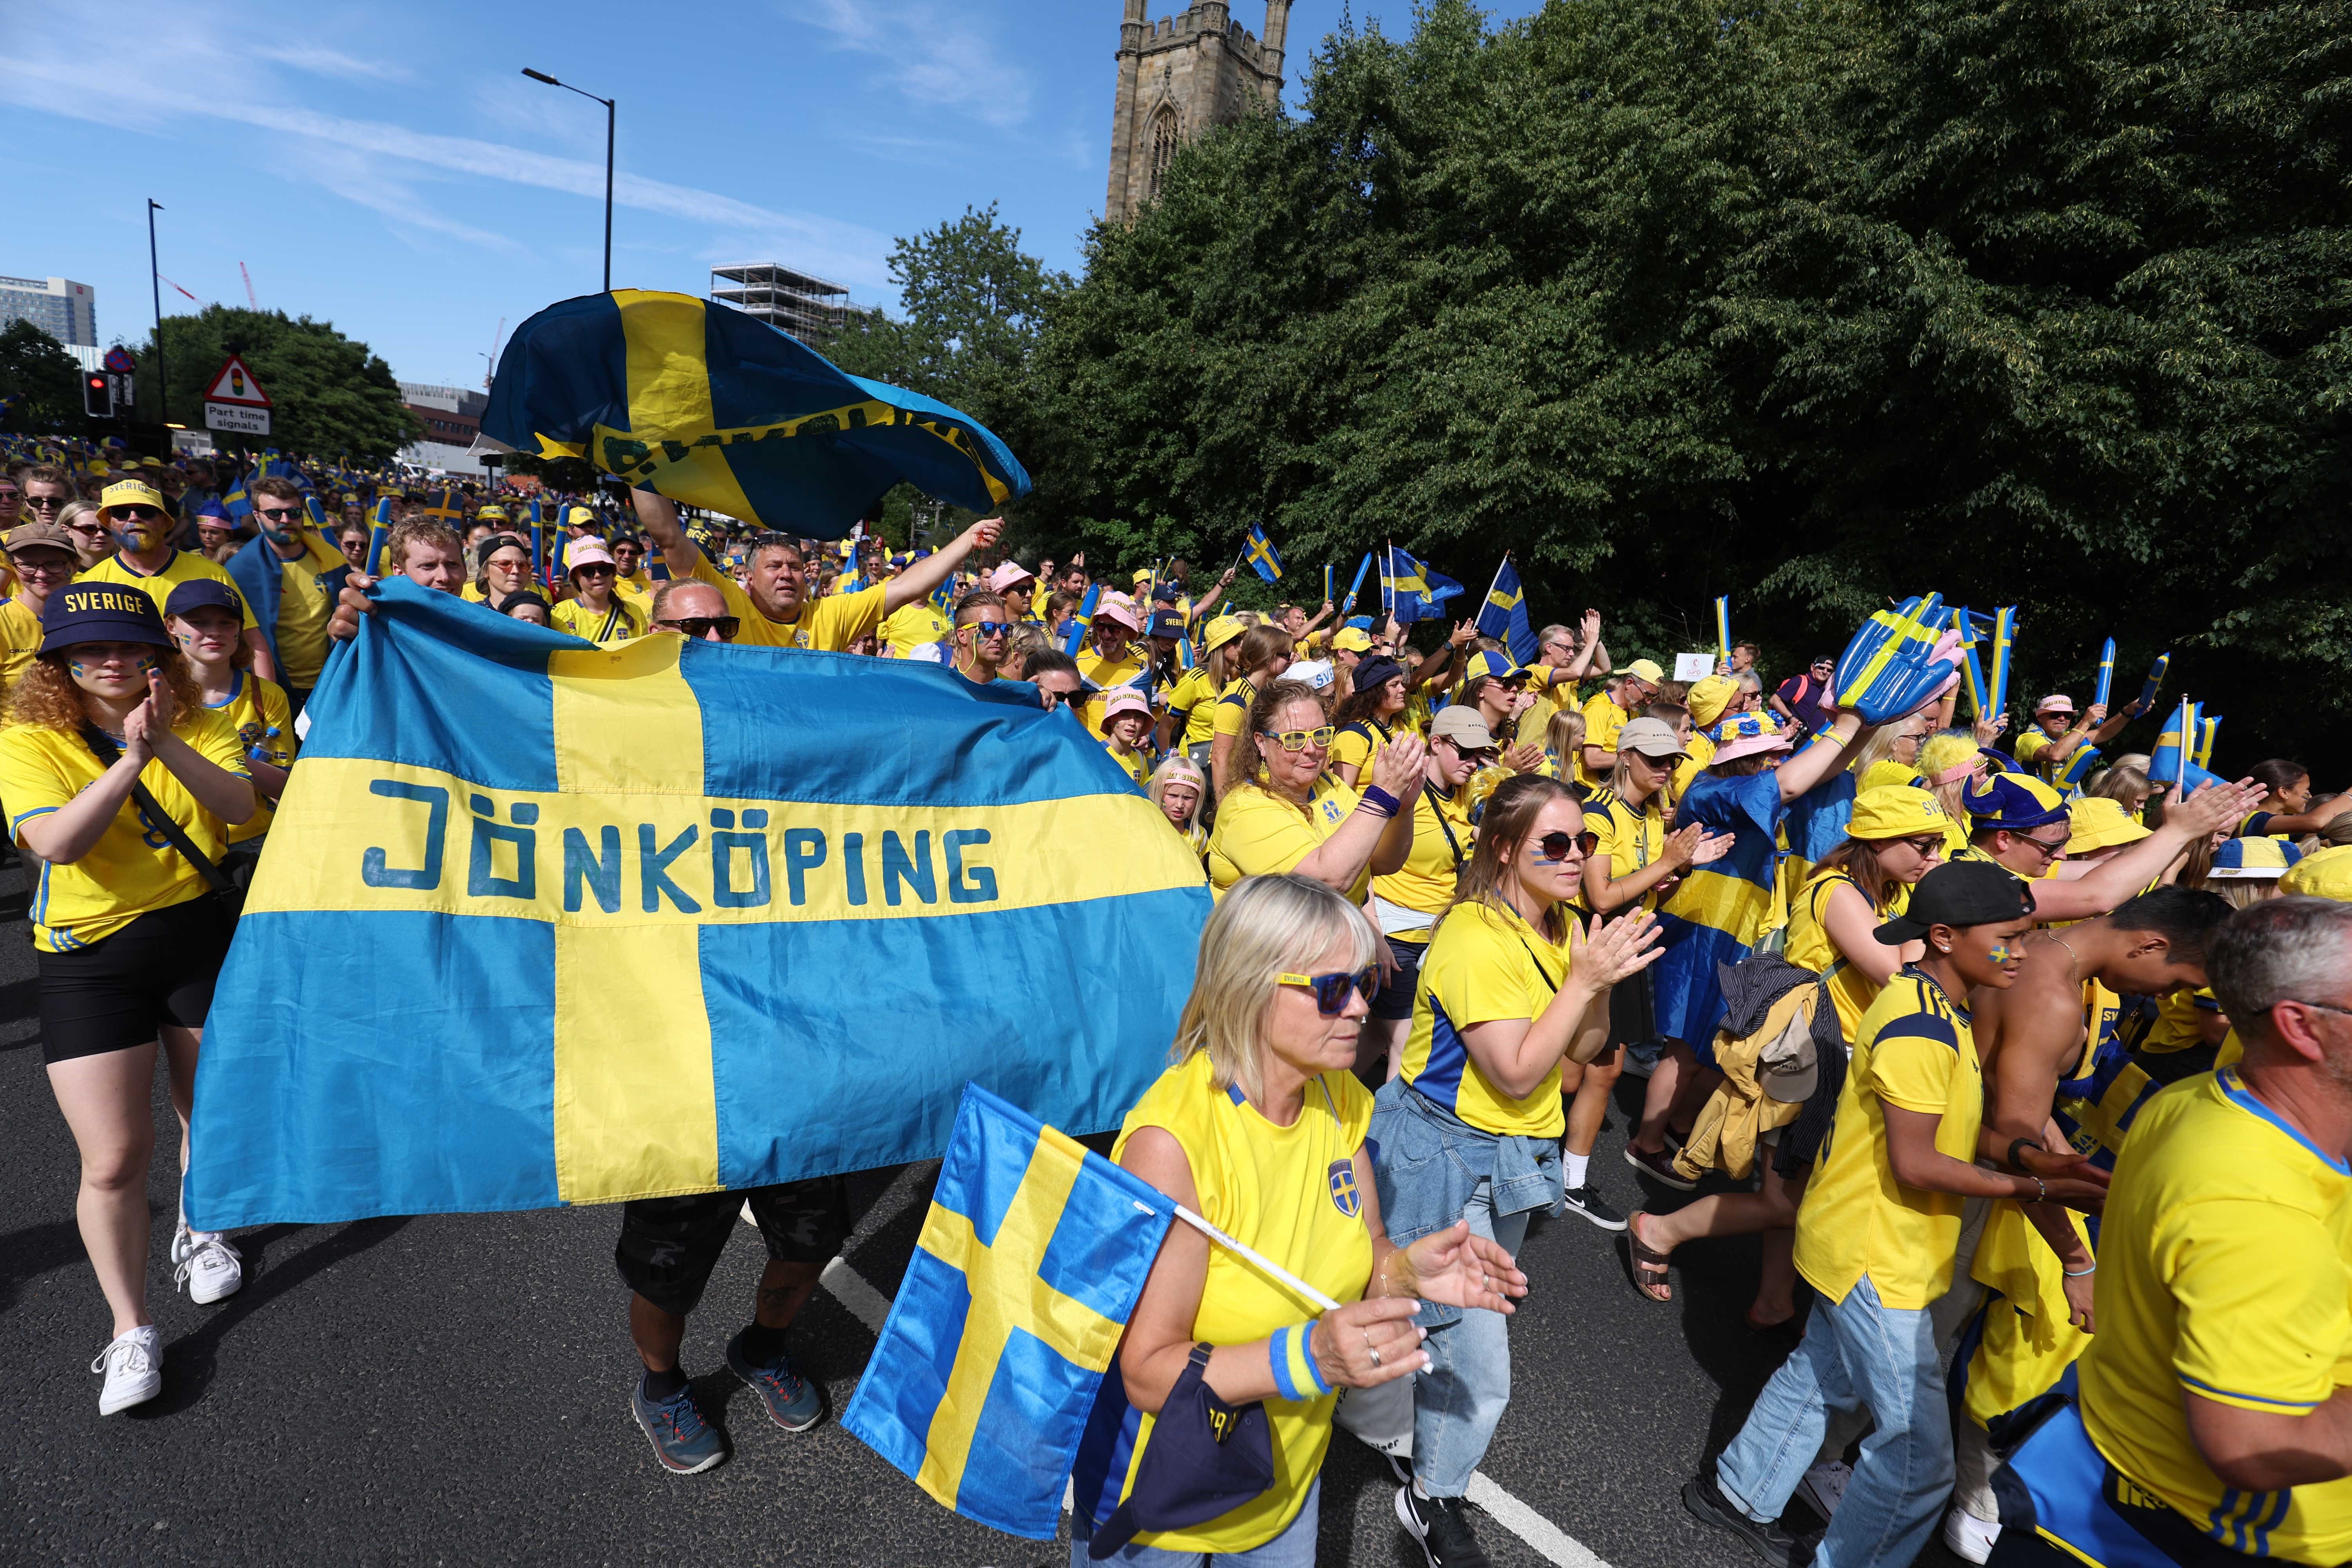 Thousands of fans from Sweden walk through Sheffield with flags and banners dressed in blue and yellow